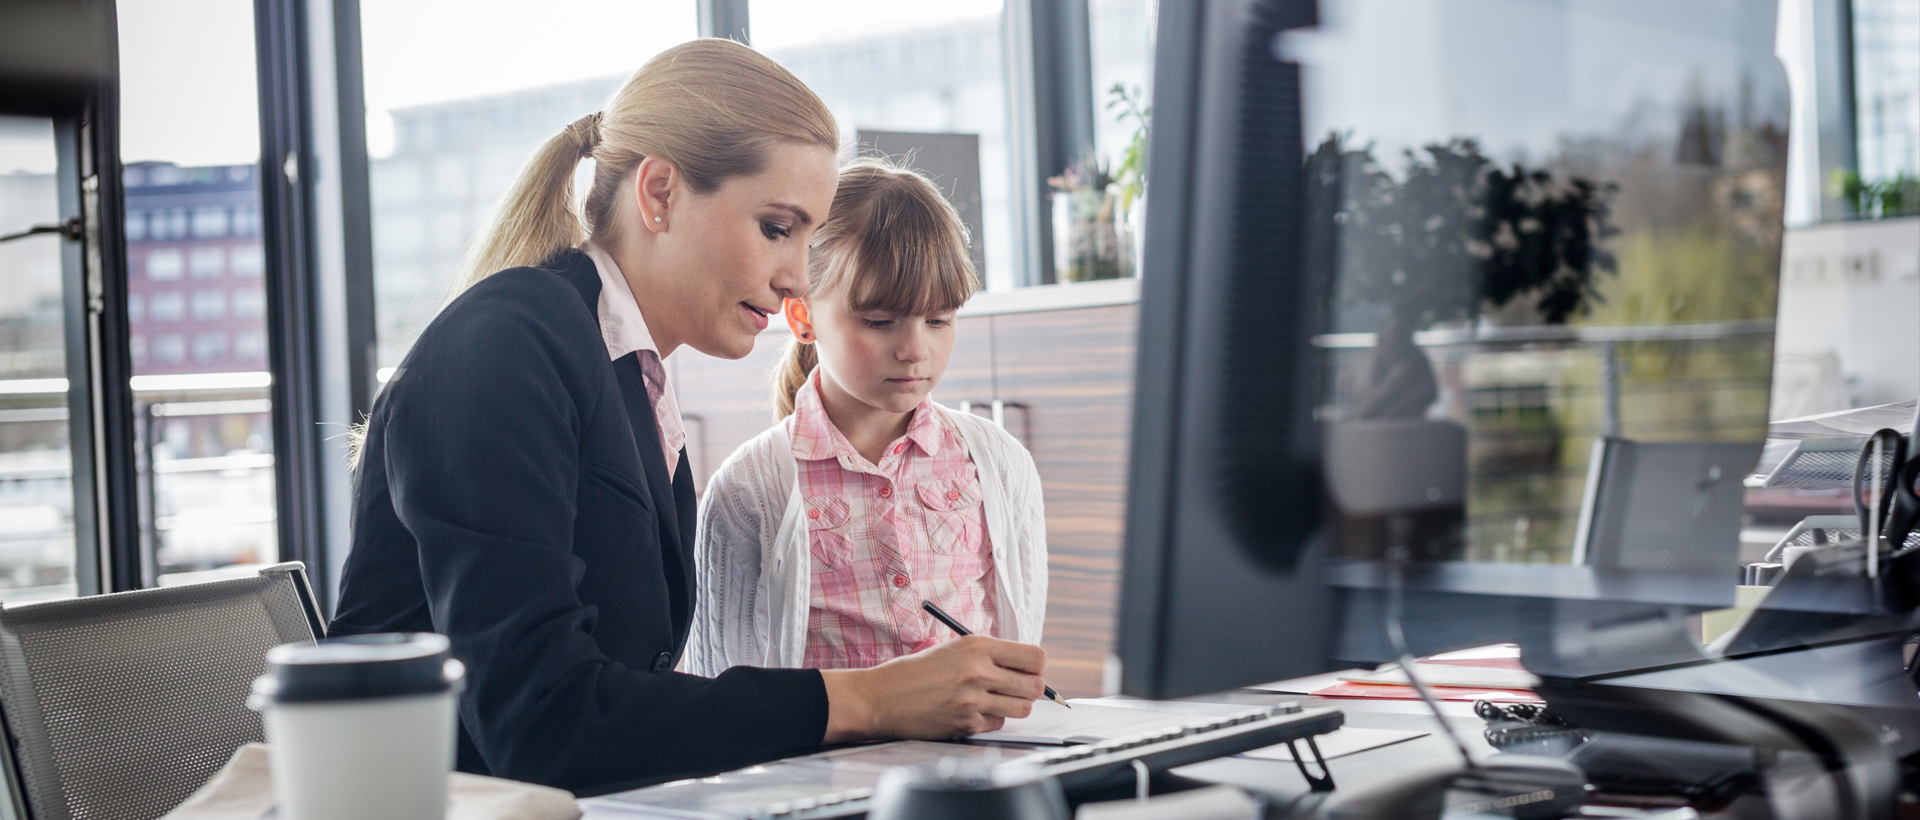 Woman working at desk with her daughter standing nearby.